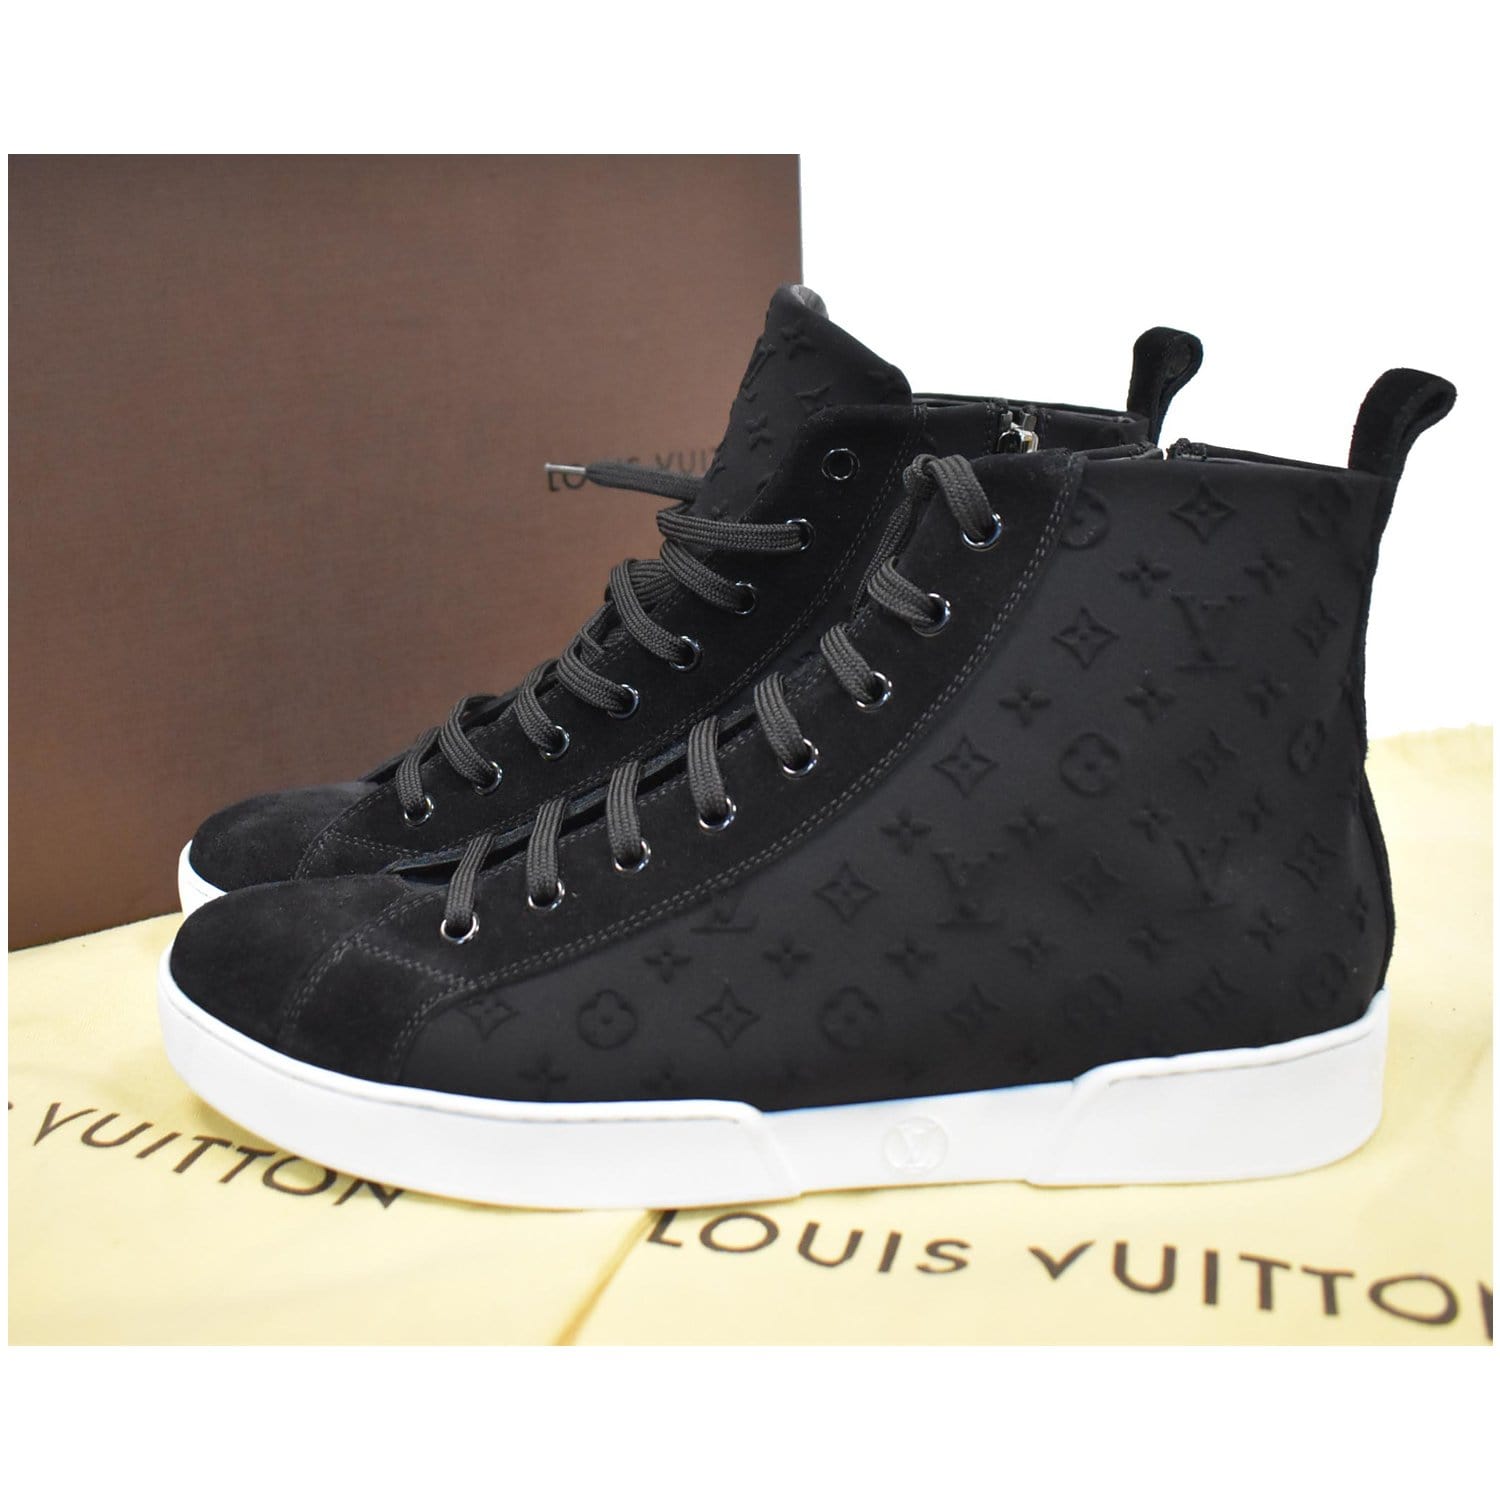 Louis Vuitton suede sneakers. Size LV 11. Black and Charcoal